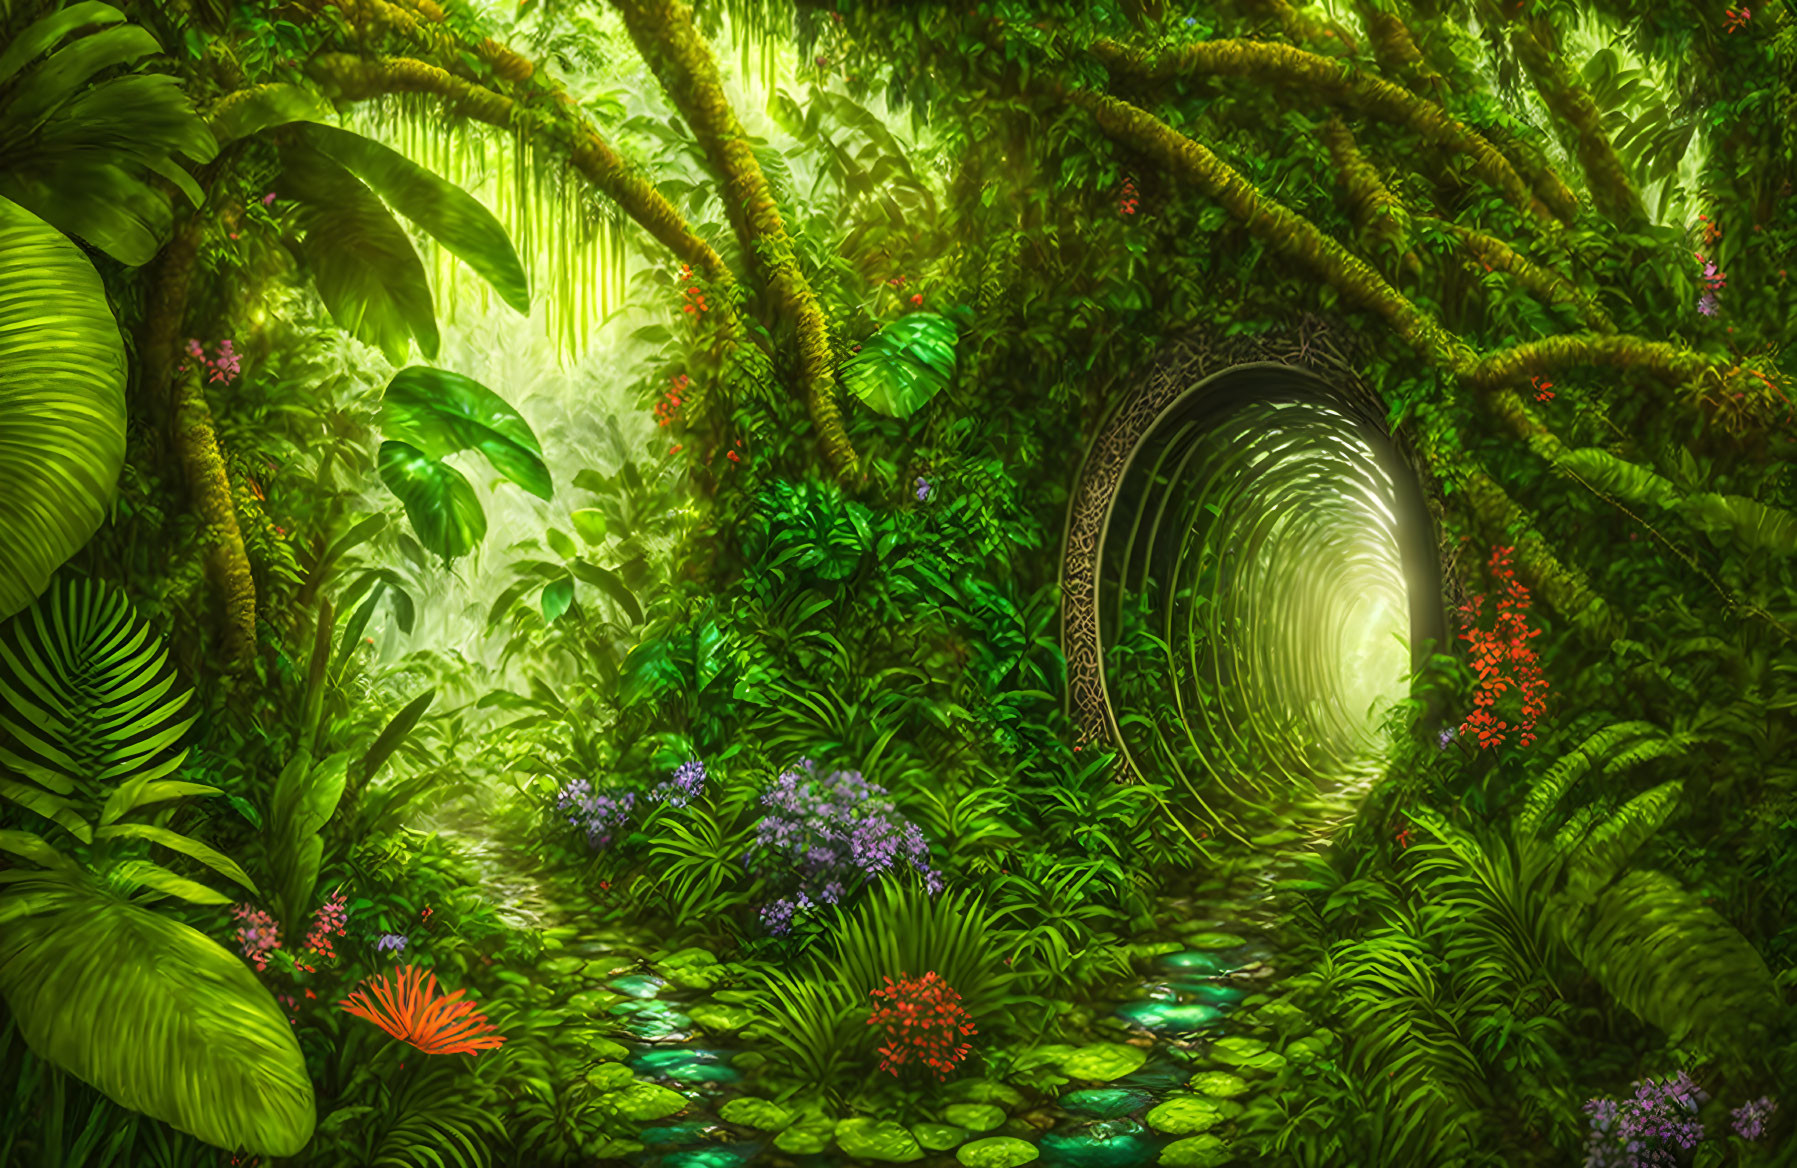 Lush Green Jungle Scene with Mysterious Tunnel Entrance